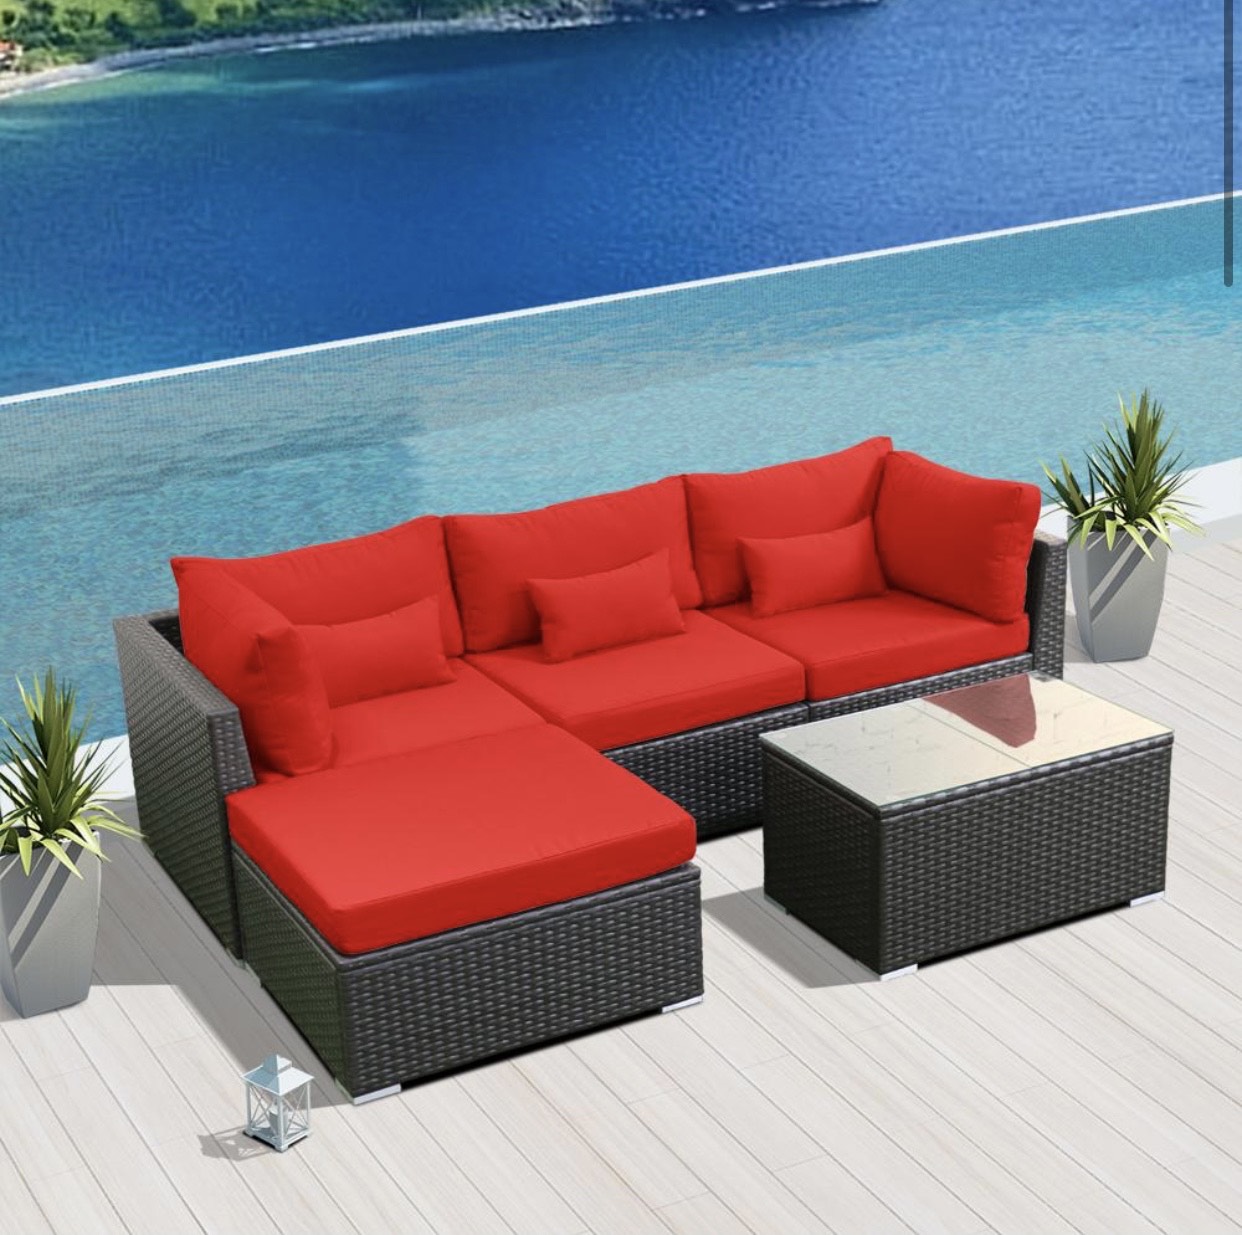 Crimson Red 5H Replacement Cushion Covers Set (Without Foam Insis)